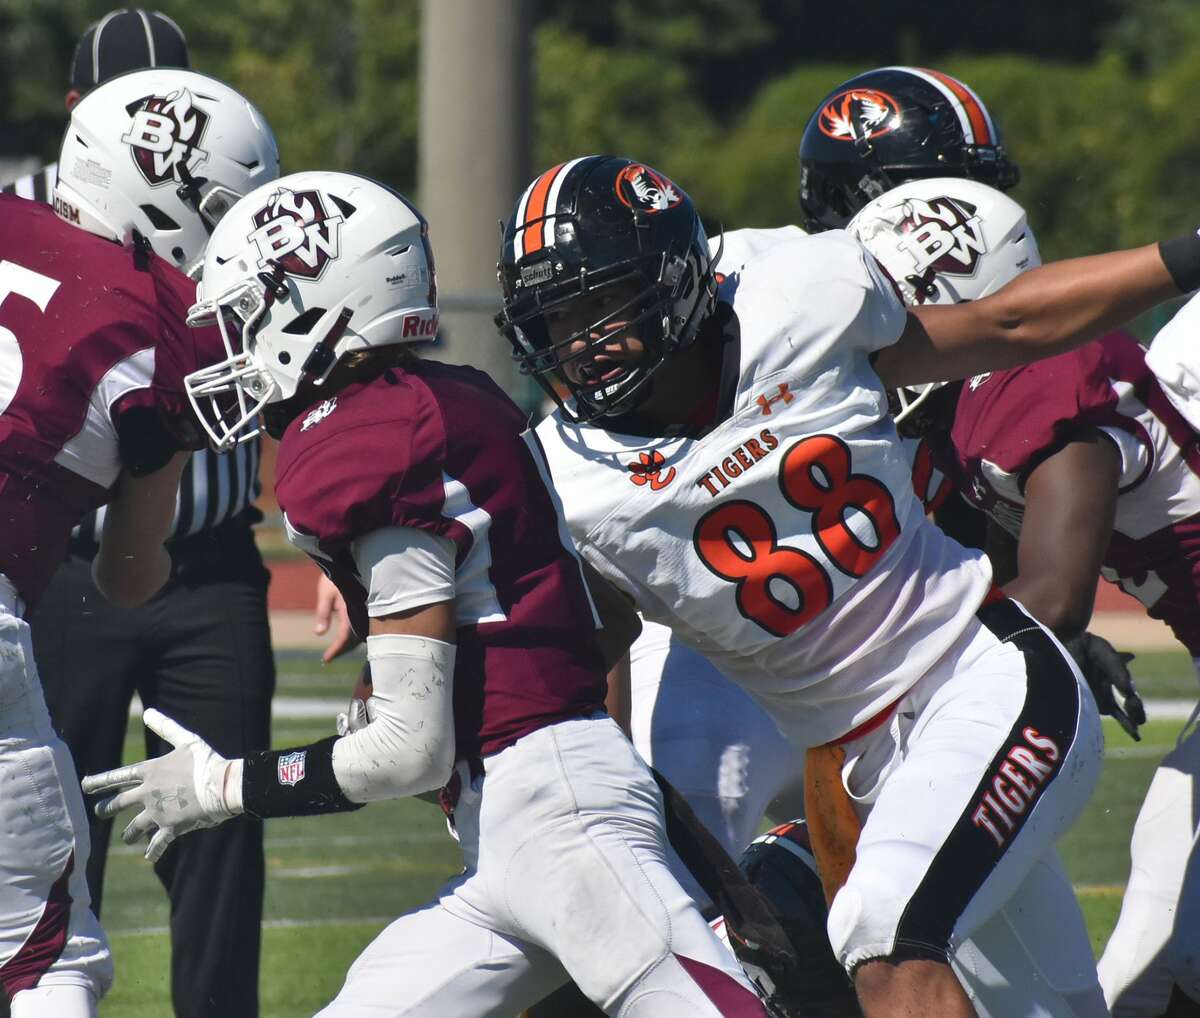 Edwardsville defensive end Iose Epenesa prepares to bring down the Belleville West ball carrier in the backfield during a game in the 2021 season.